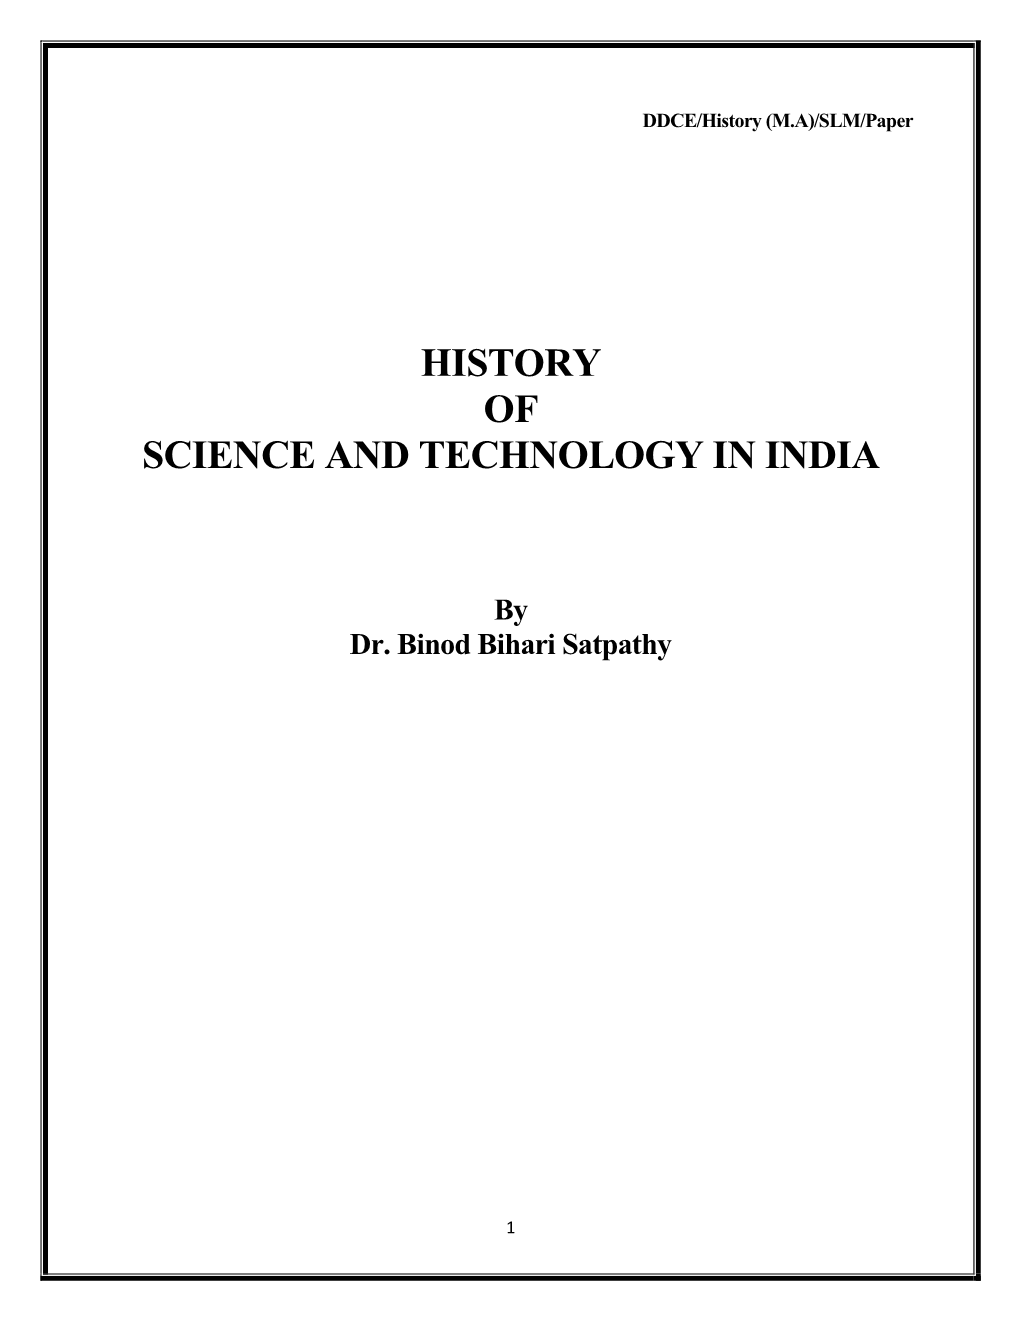 History of Science and Technology in India